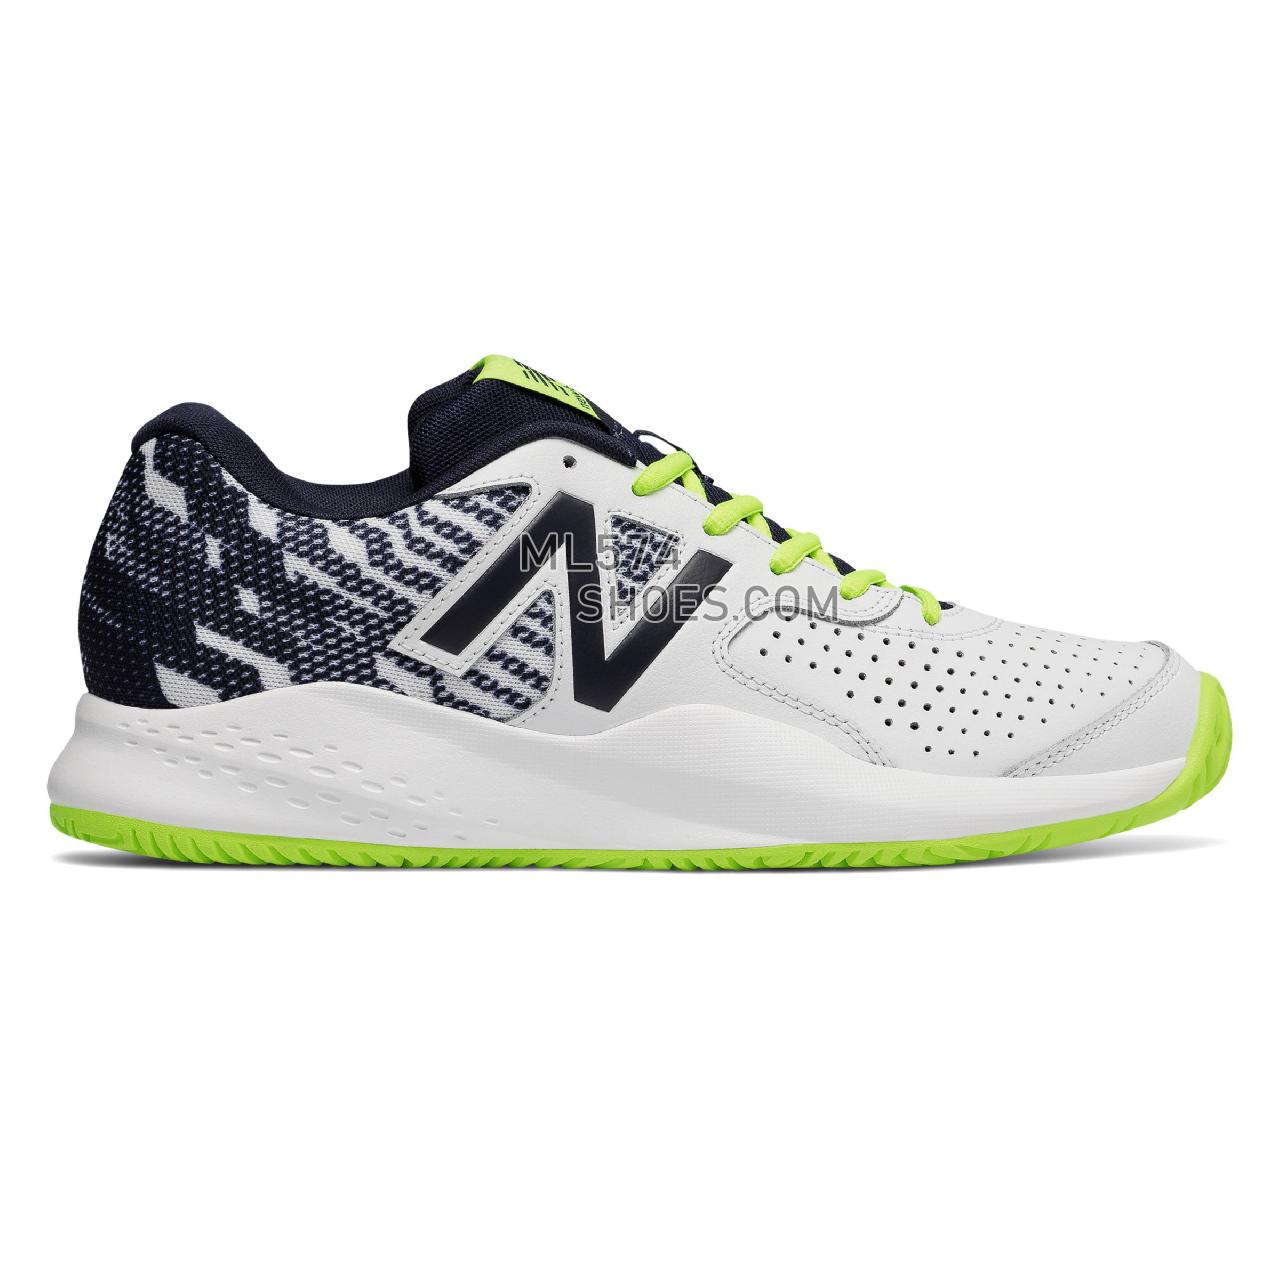 New Balance 696v3 - Men's 696 - Tennis / Court White with Pigment and Hi-Lite - MCH696H3